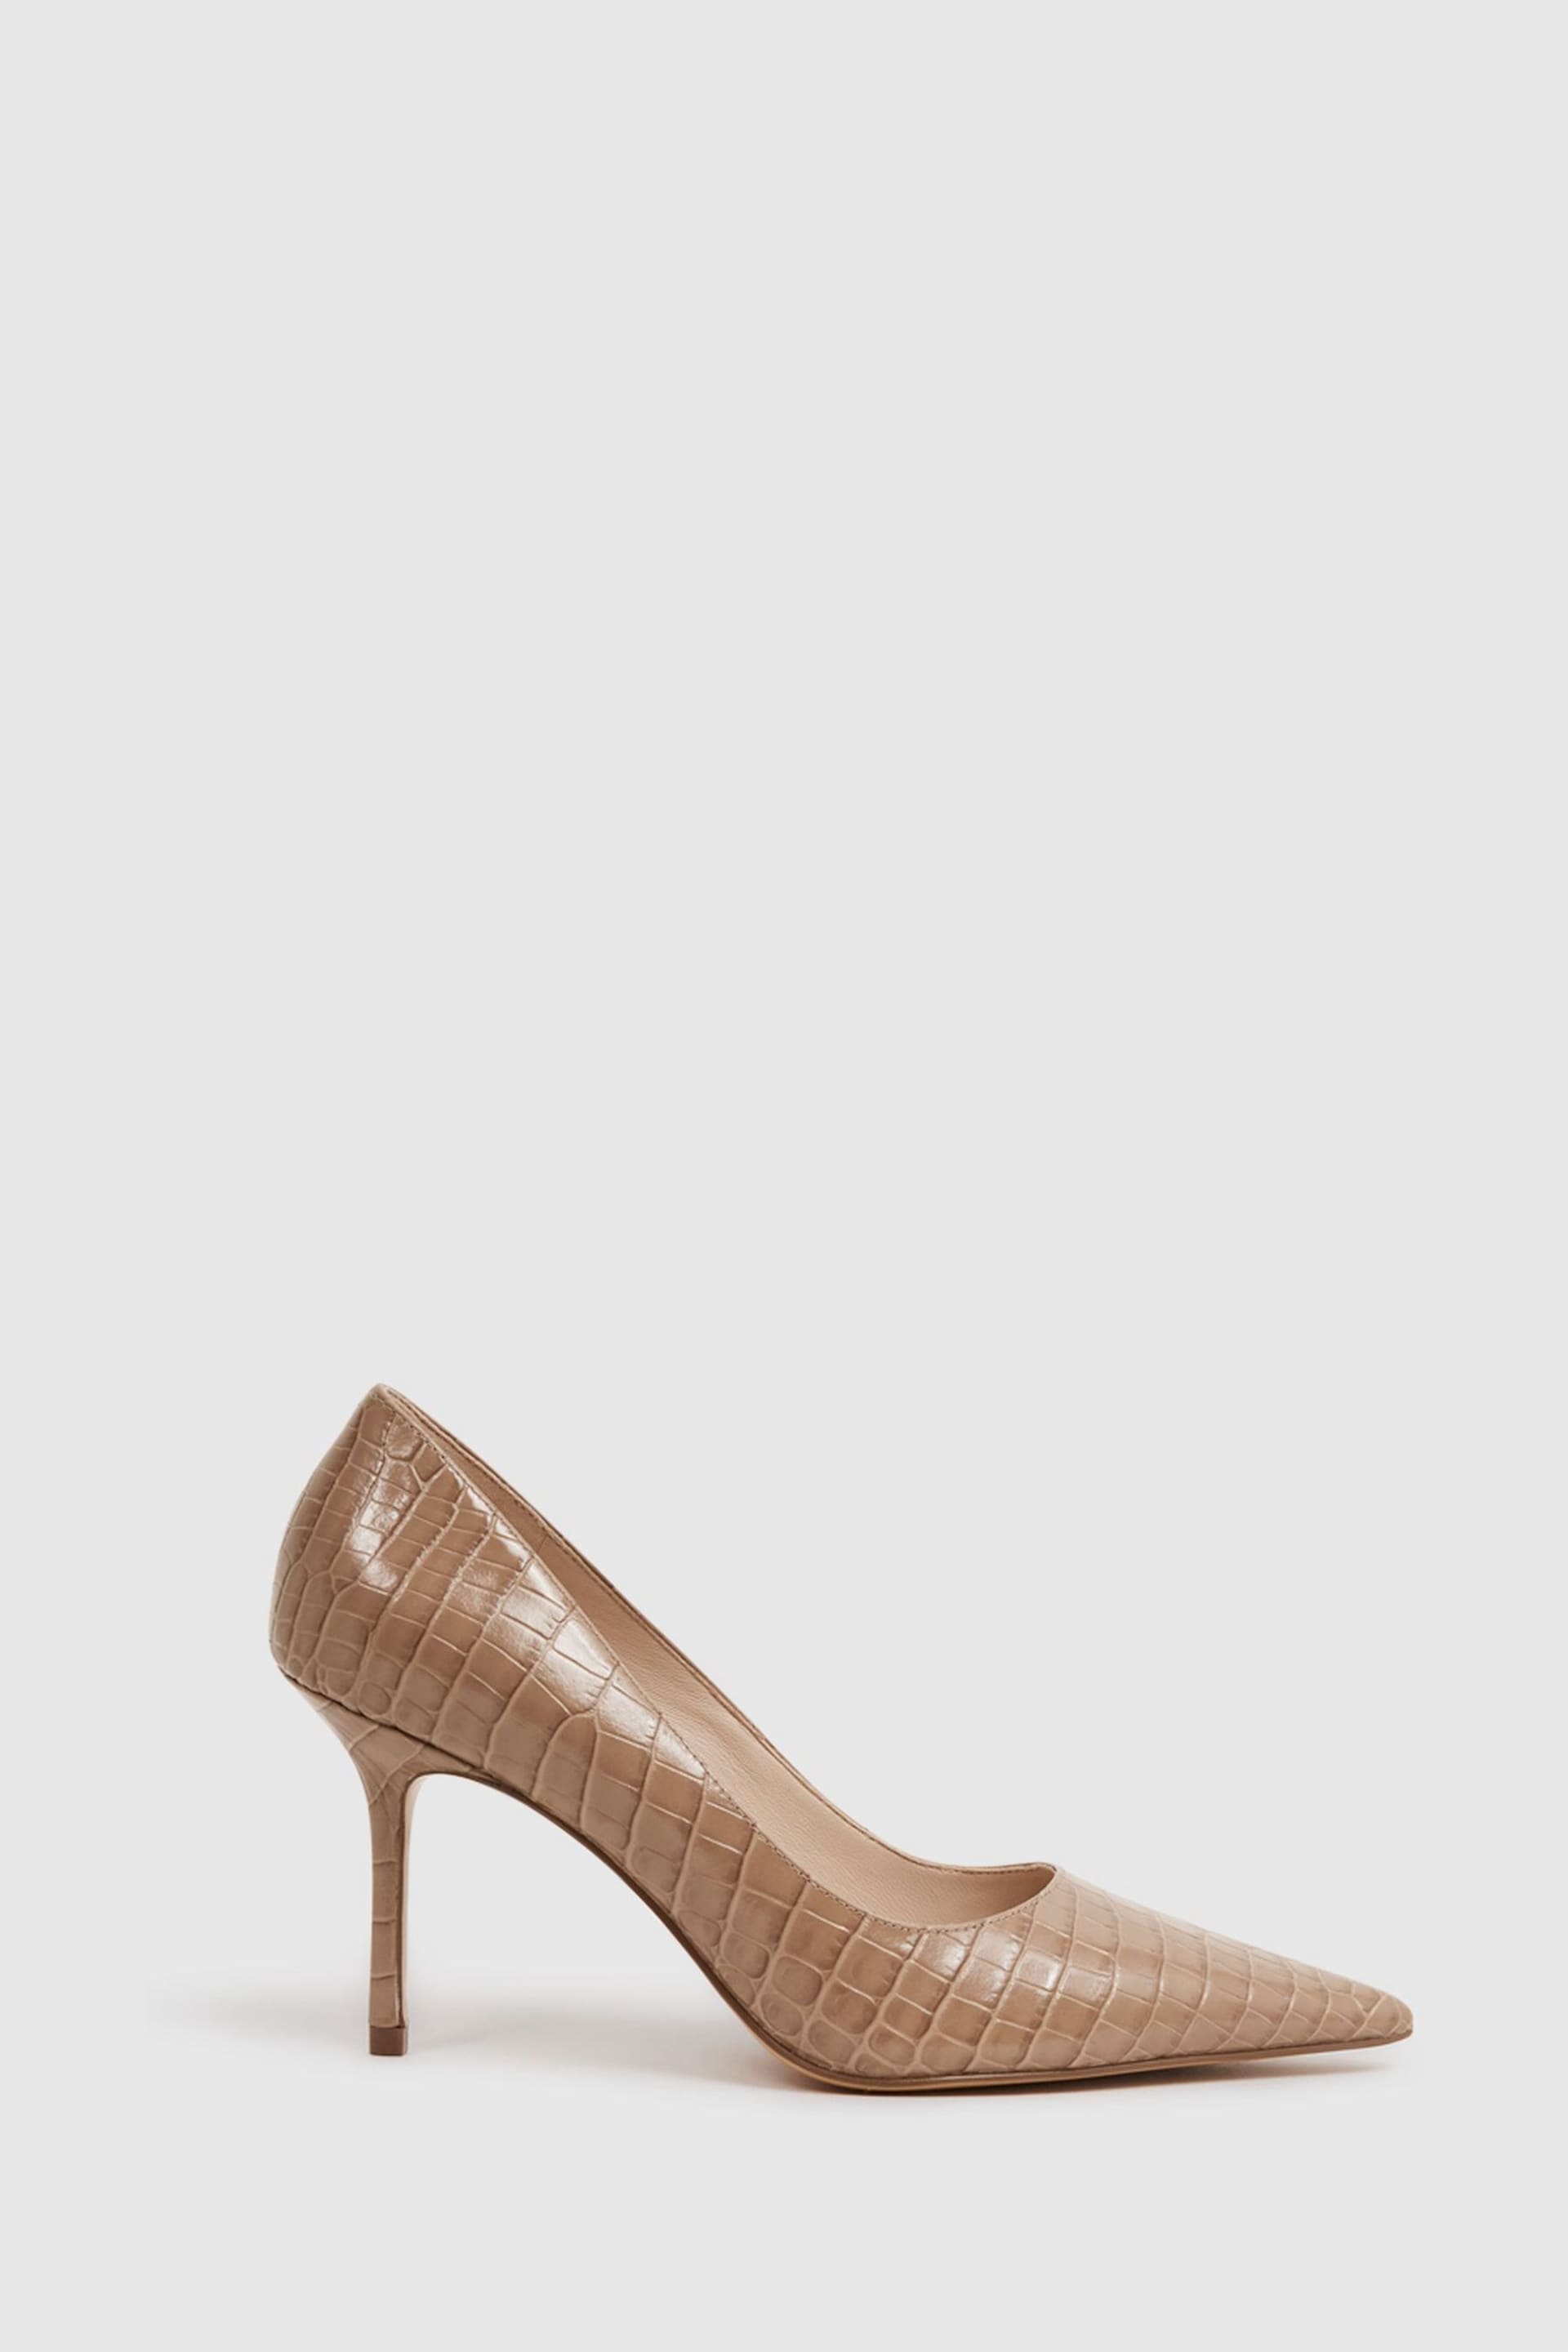 Reiss Camel Elina Mid Heel Leather Court Shoes - Image 1 of 6